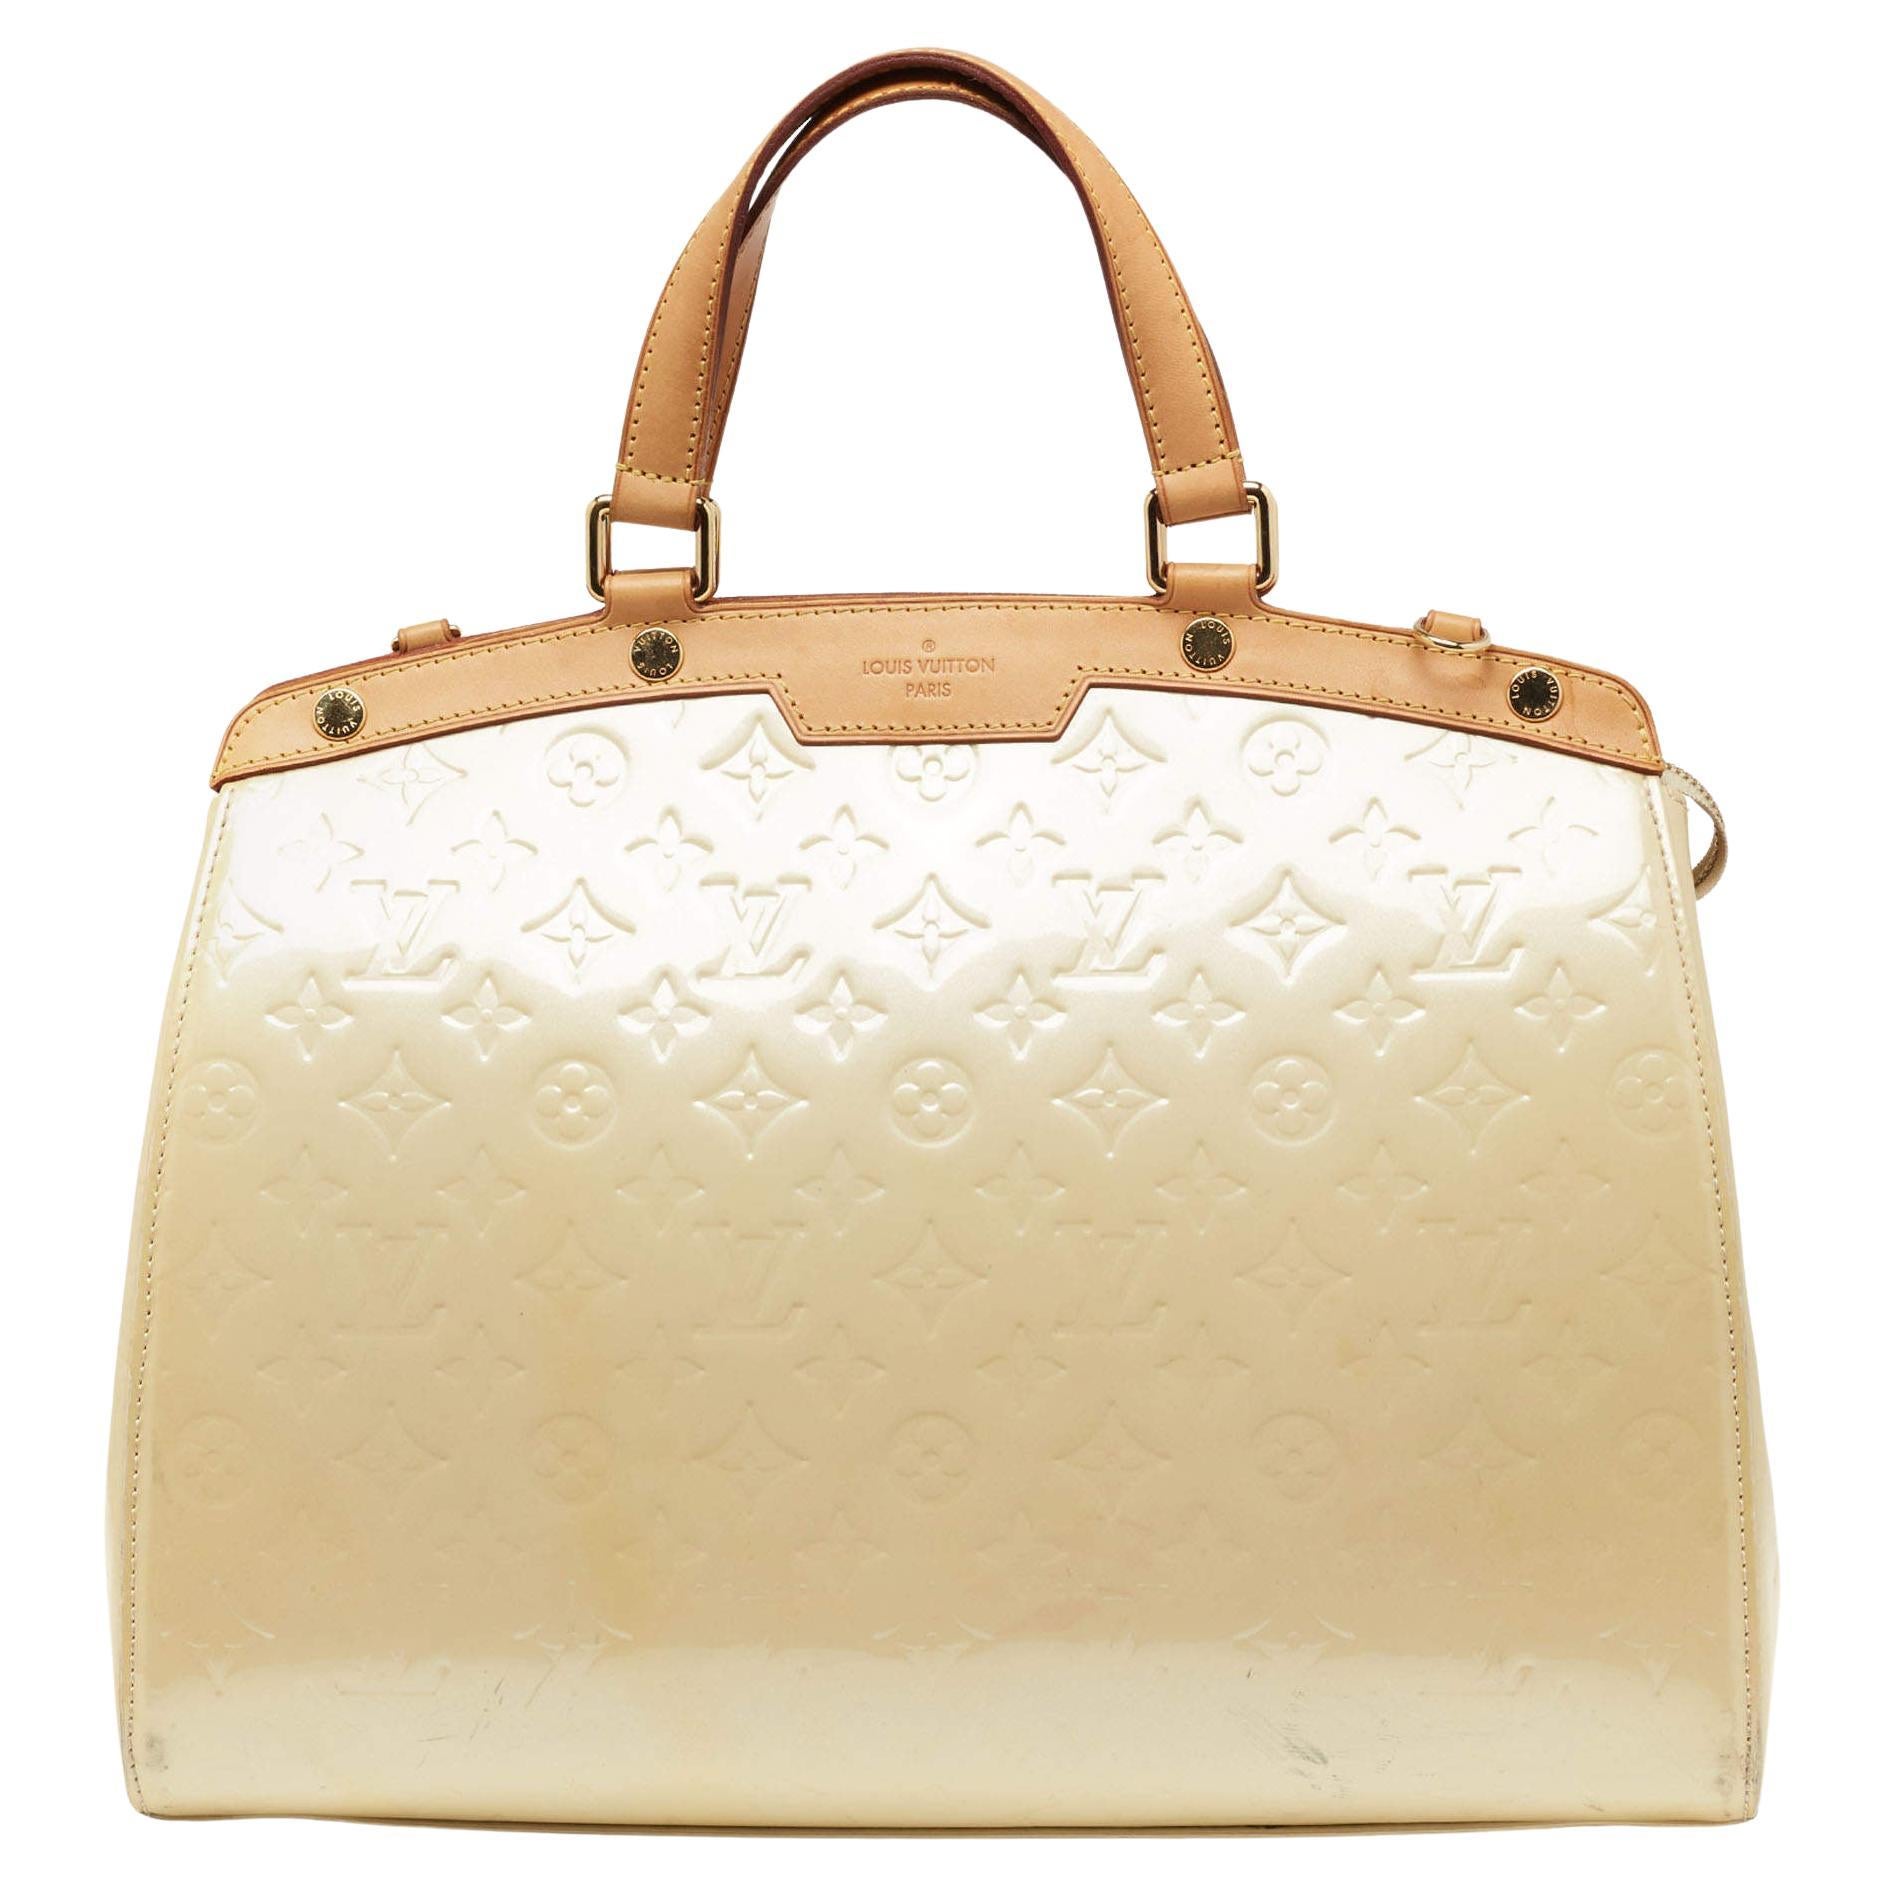 Louis Vuitton on X: A must-have bag that nods to the past. The